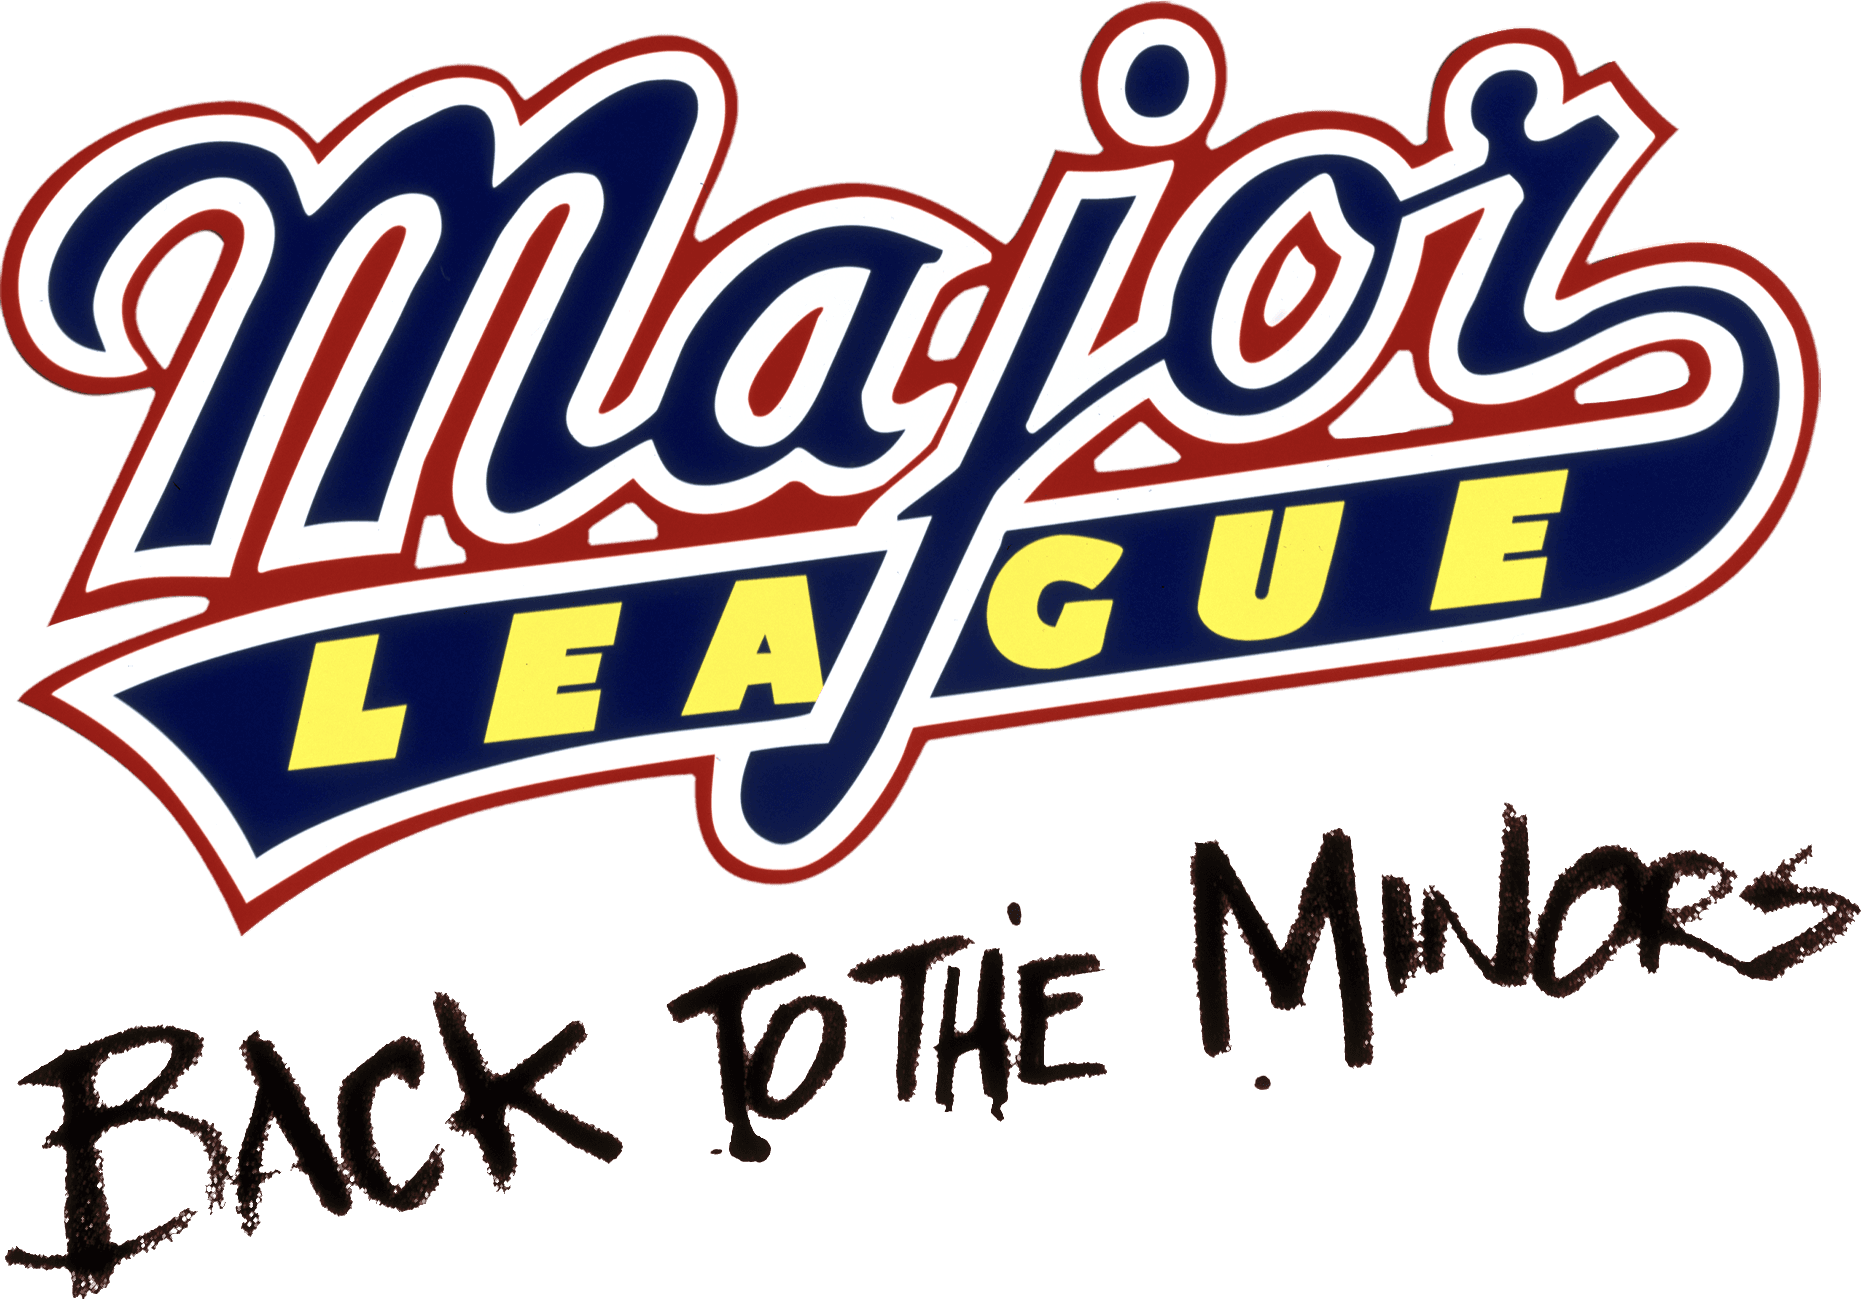 Major League: Back to the Minors logo